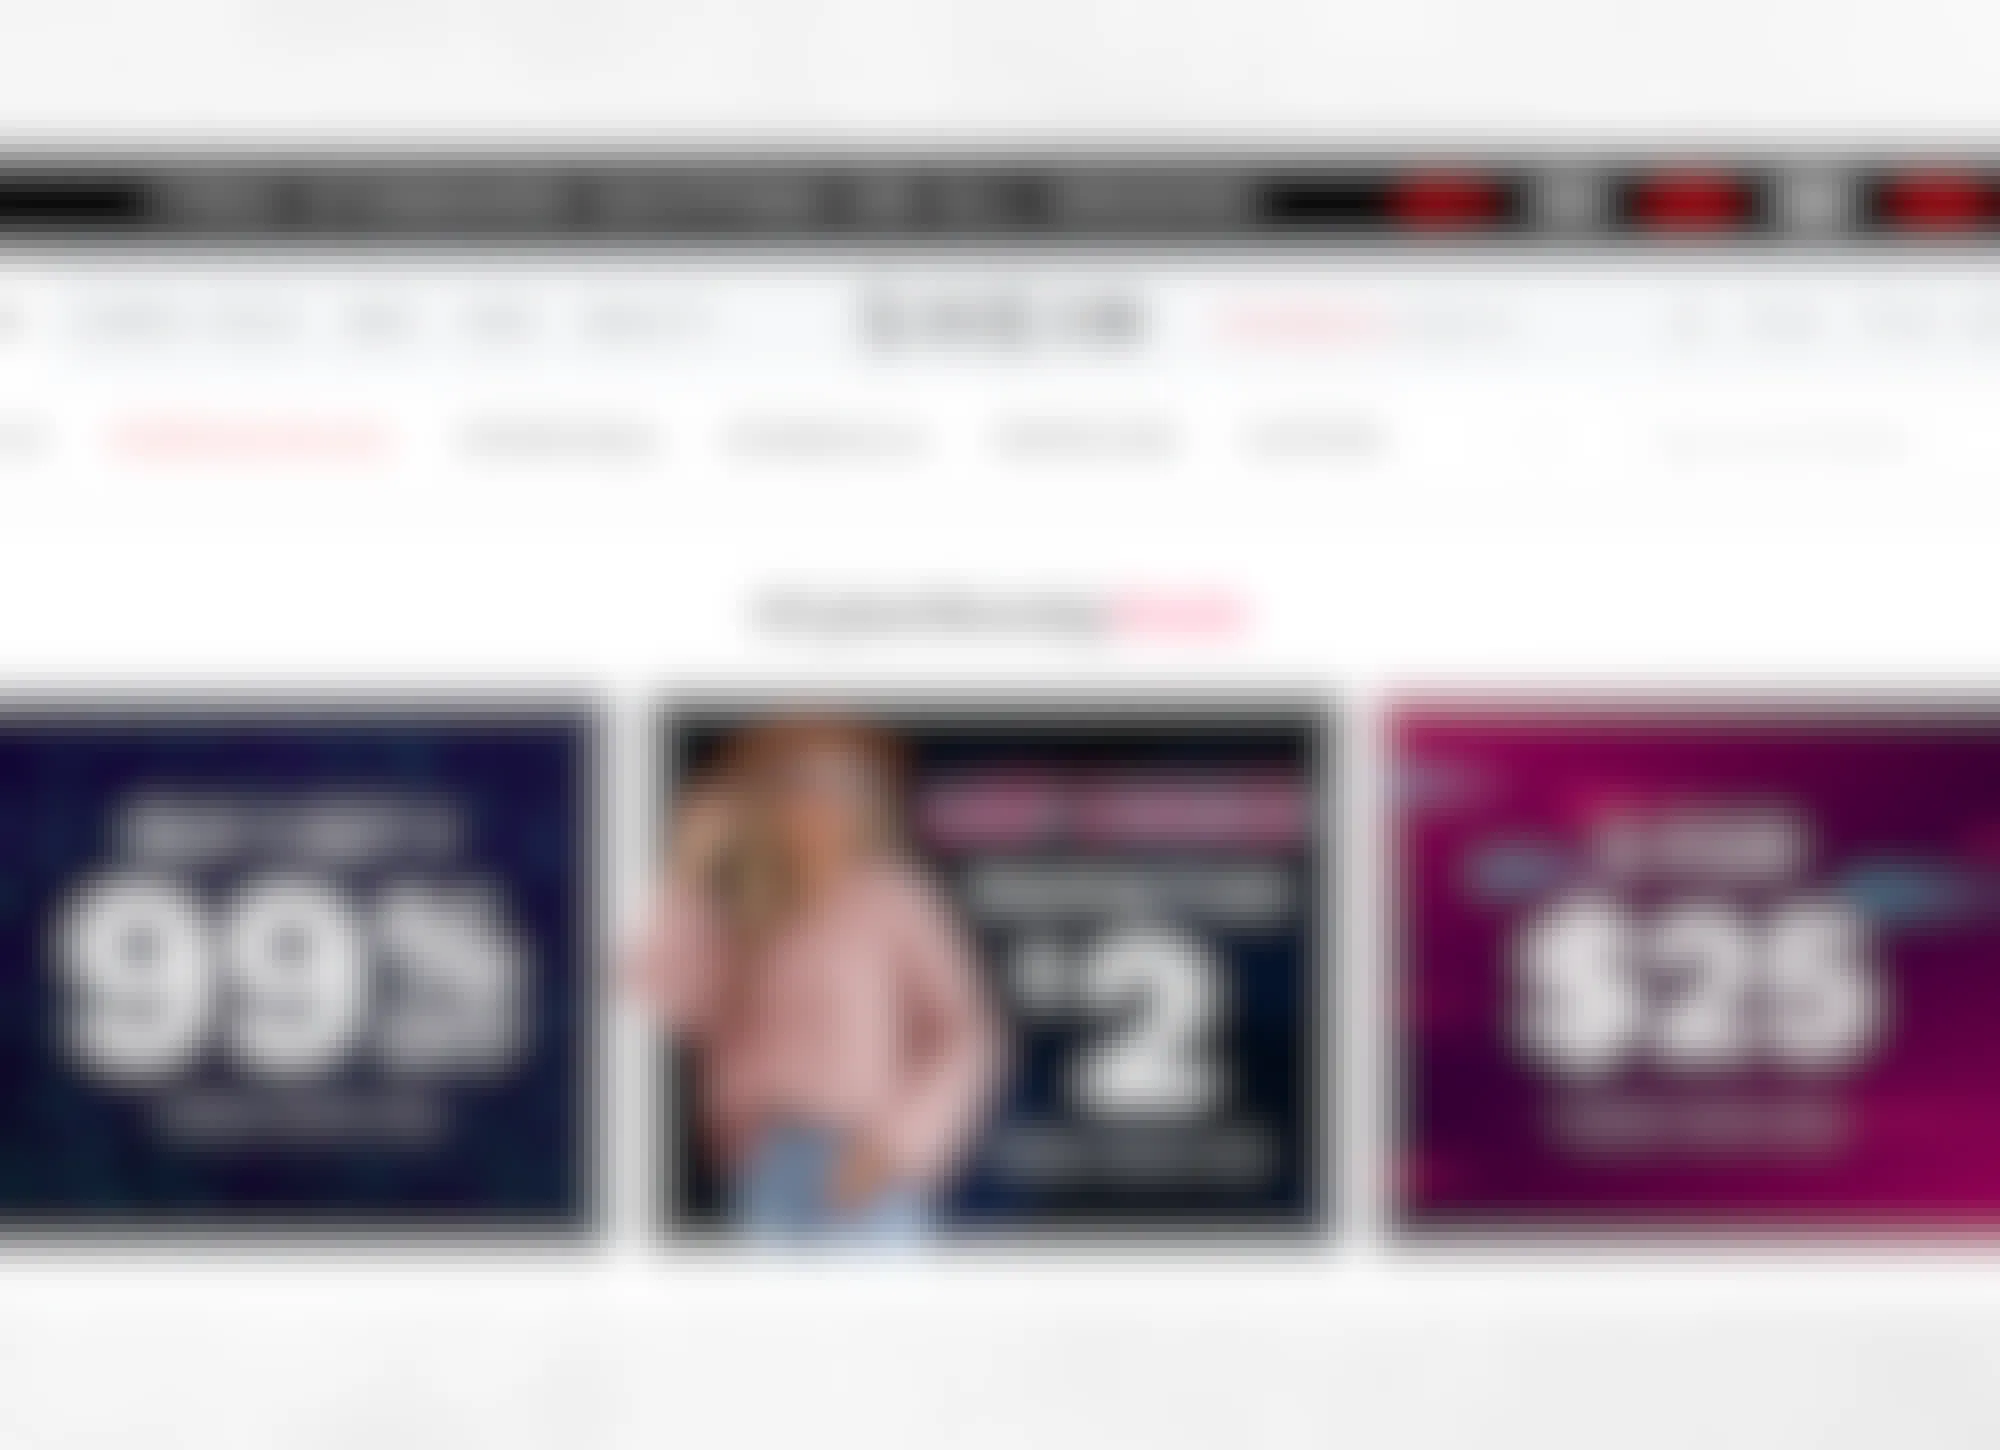 shein homepage screenshot of cyber monday 2020 deals like buy one get one 99% off